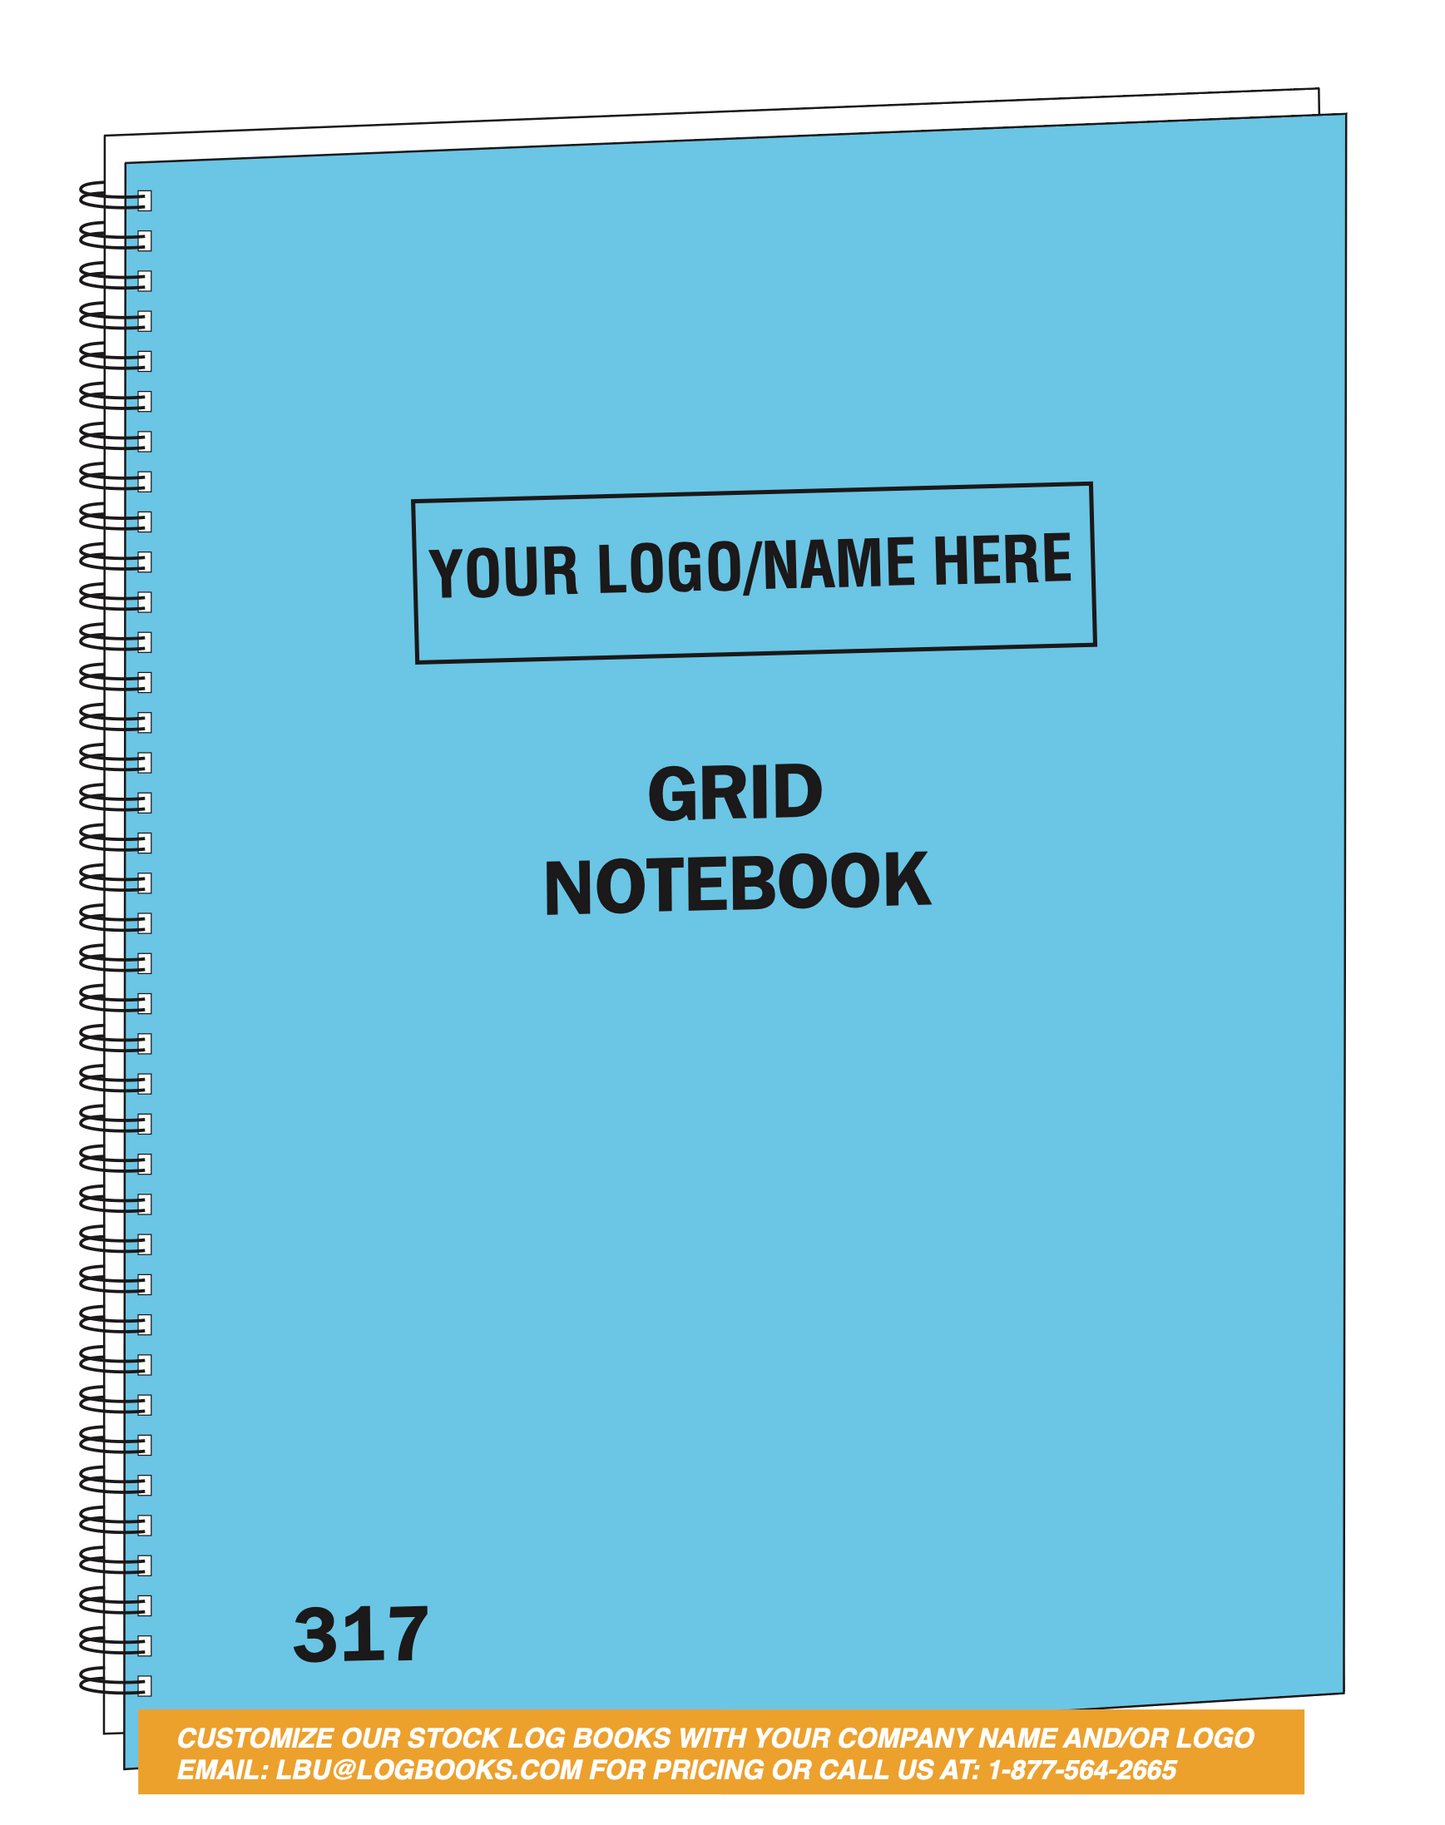 Grid Notebook Sample Cover